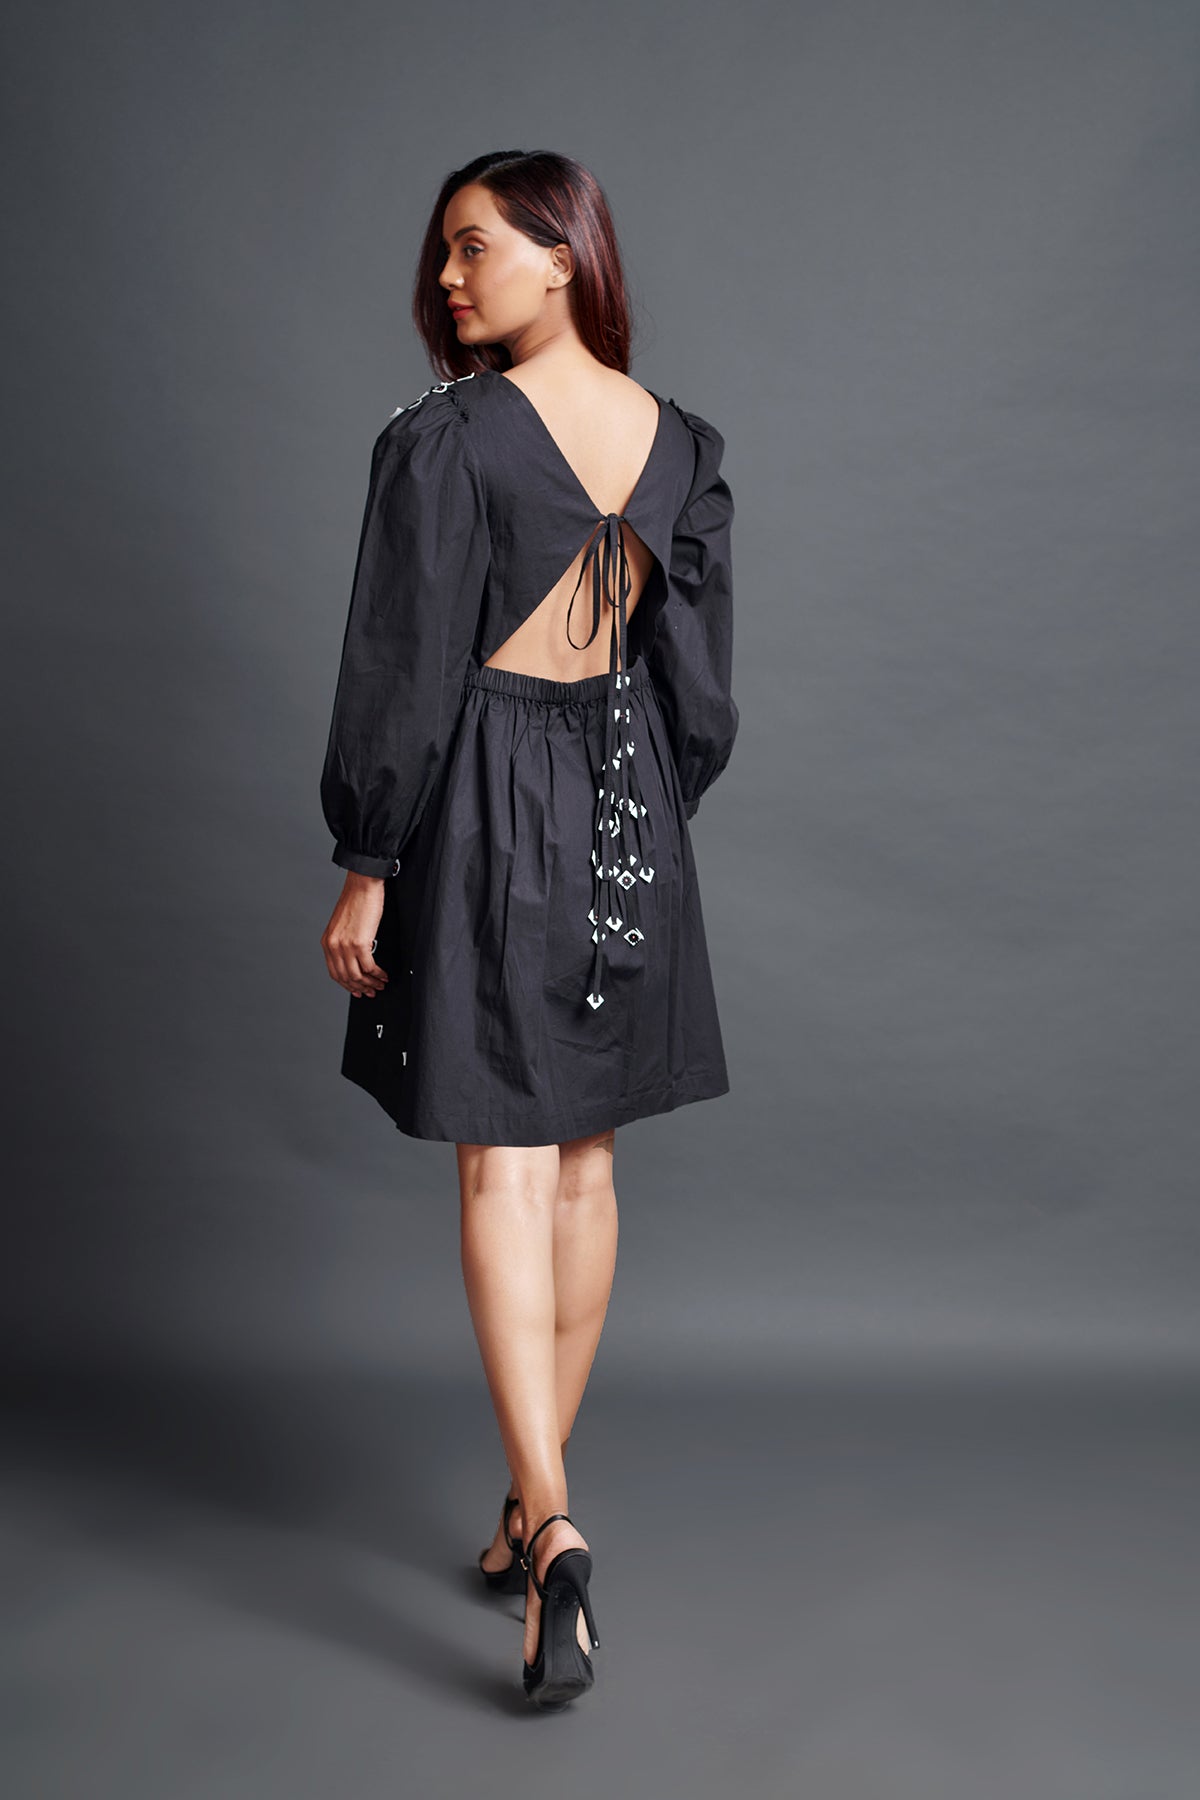 Image of BLACK A-LINE DRESS IN COTTON BASE WITH EMBROIDERY AND BACK KNOT DETAIL. From savoirfashions.com